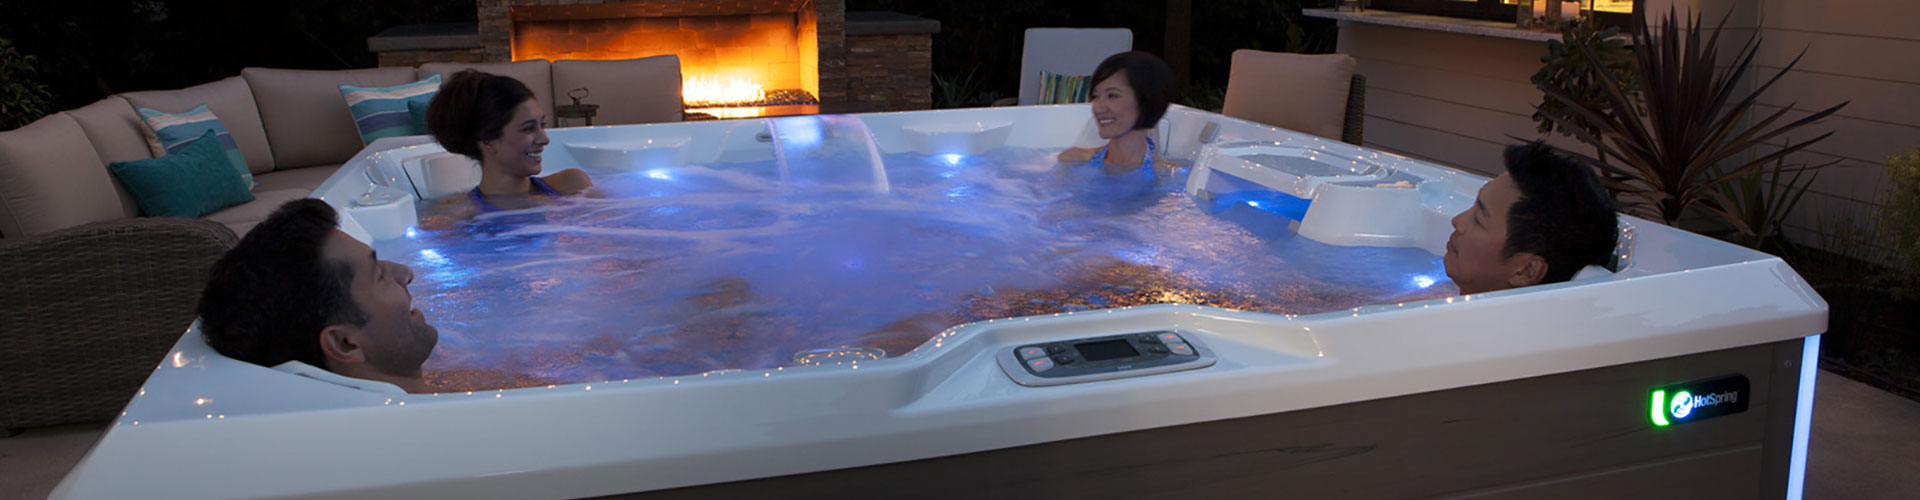 Are Hot Tubs a Good Investment?